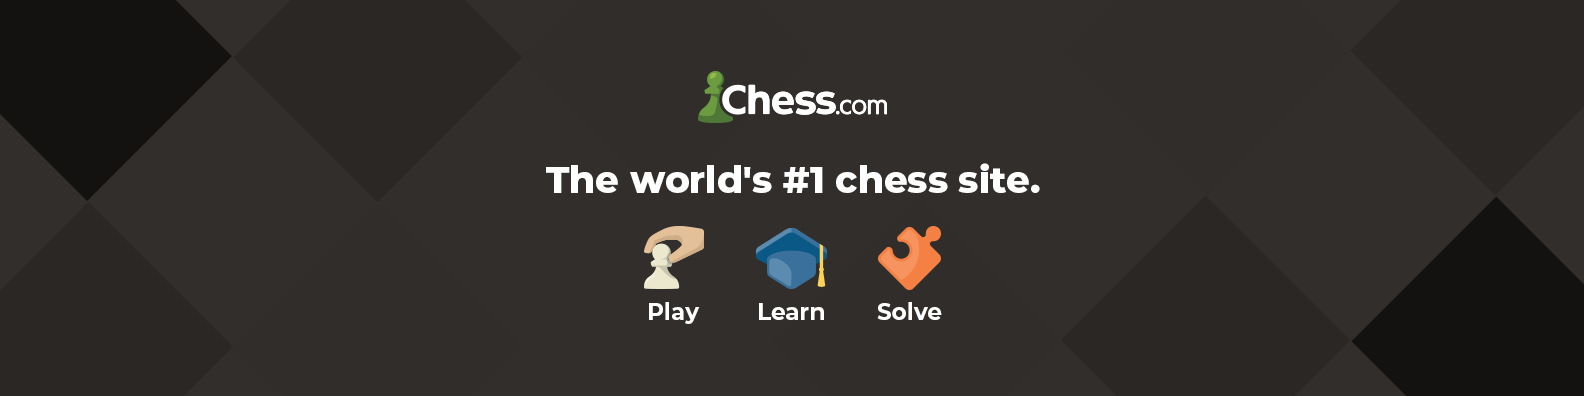 Chess Online to Play - Remote Chess Academy